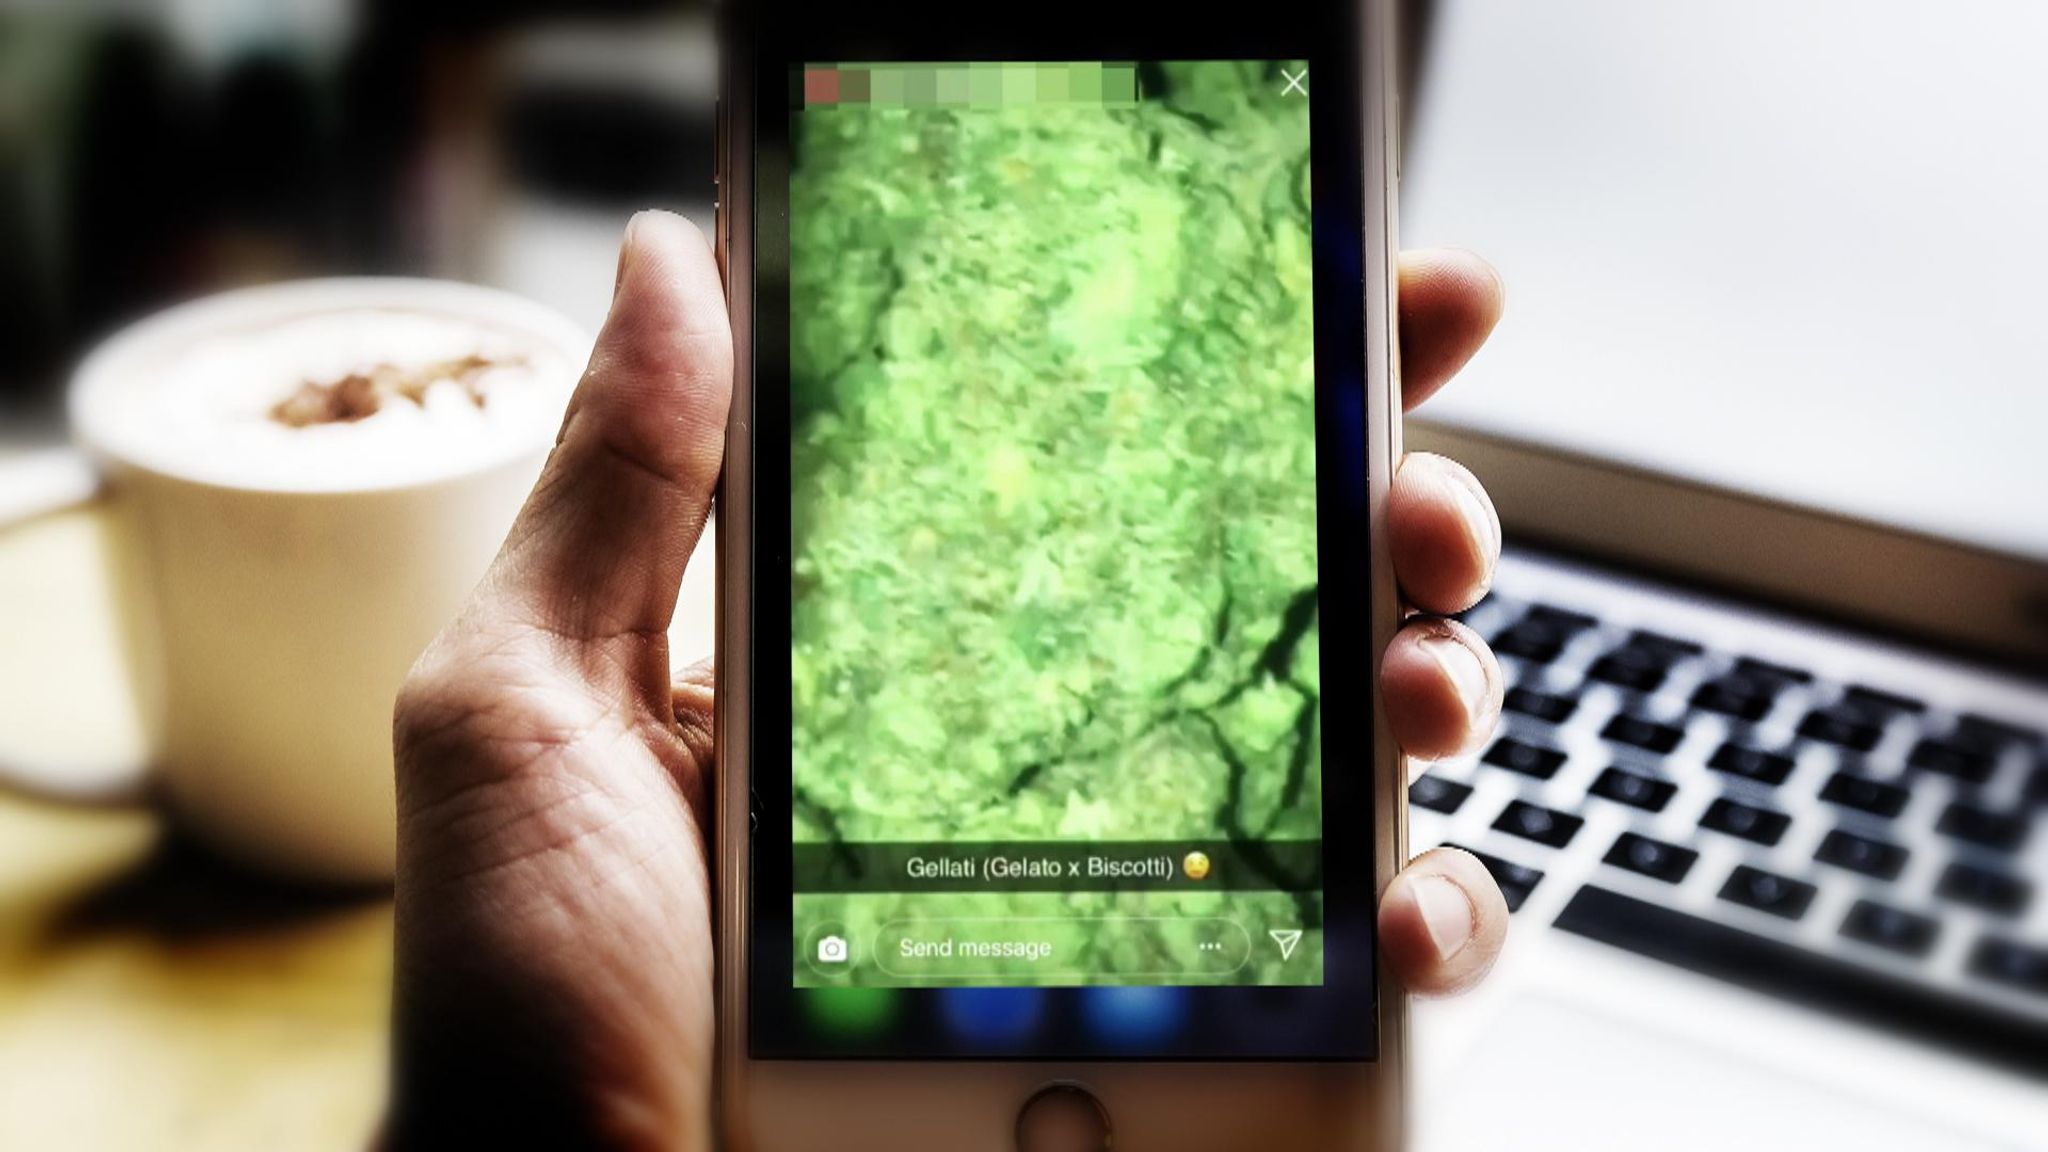 Cops Are on Snapchat: Wisconsin Man Gets Popped After Posting Weed Snaps